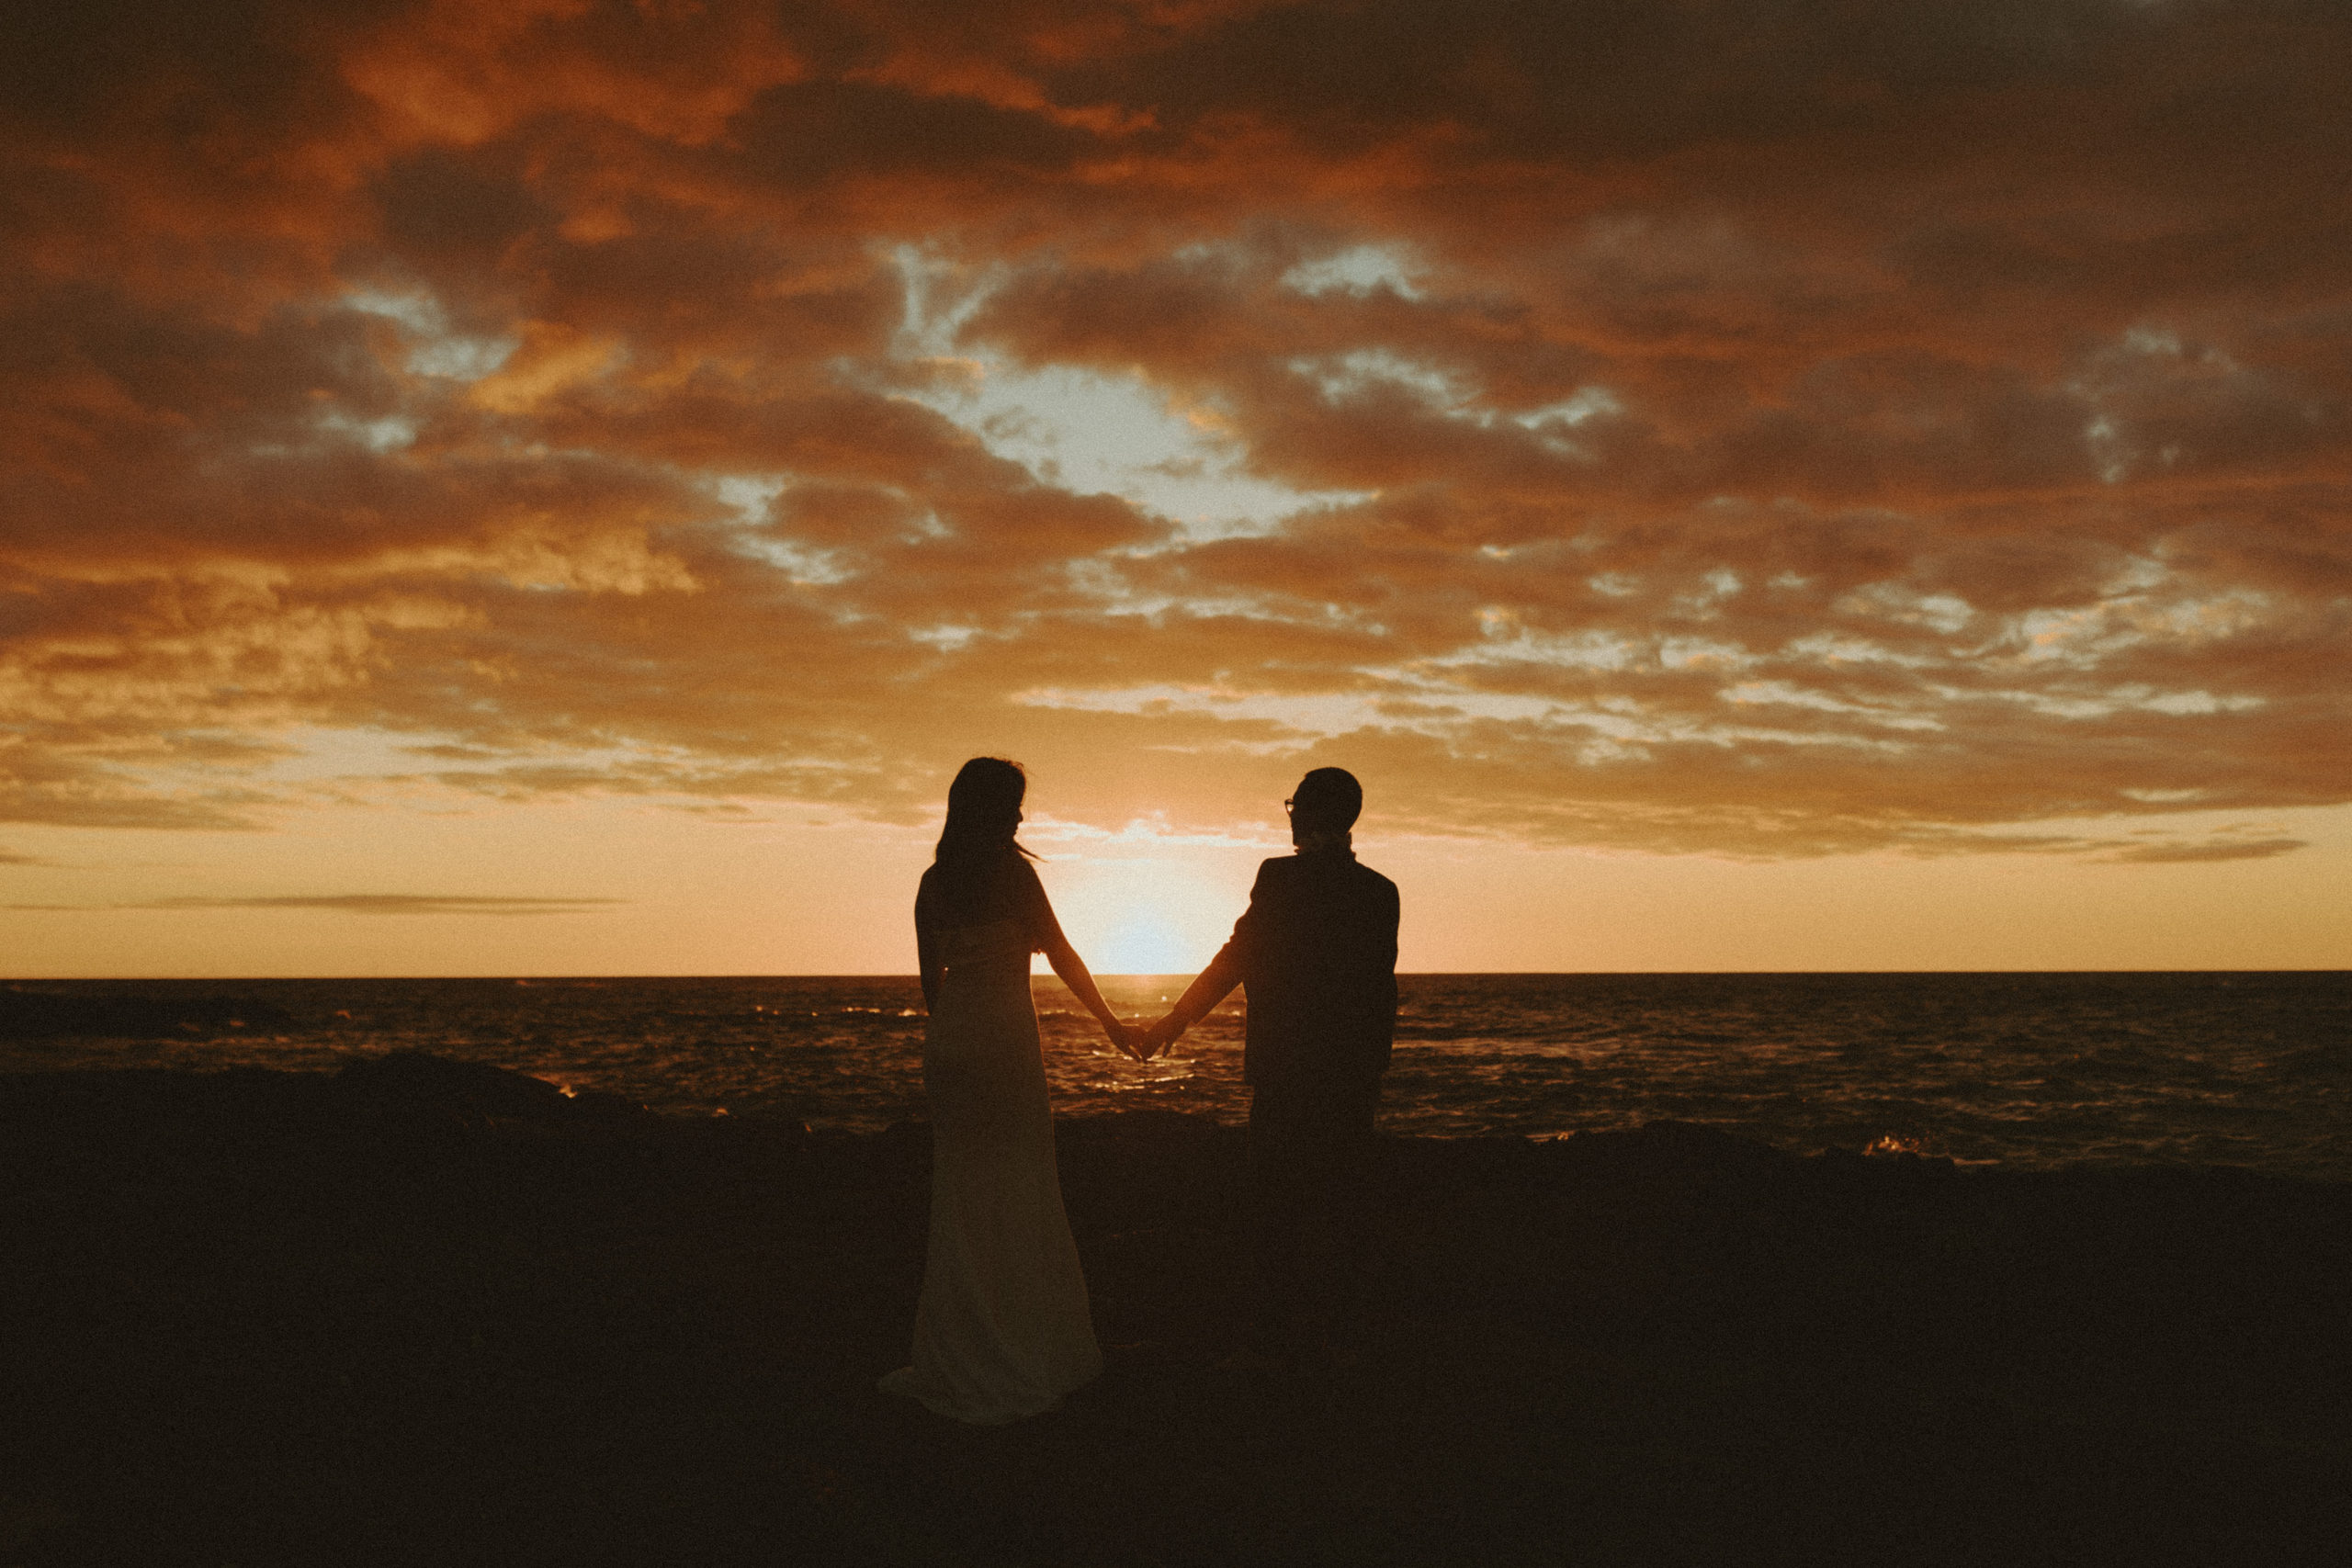 the wedding couple holding hands during the orange sunset in Hawaii